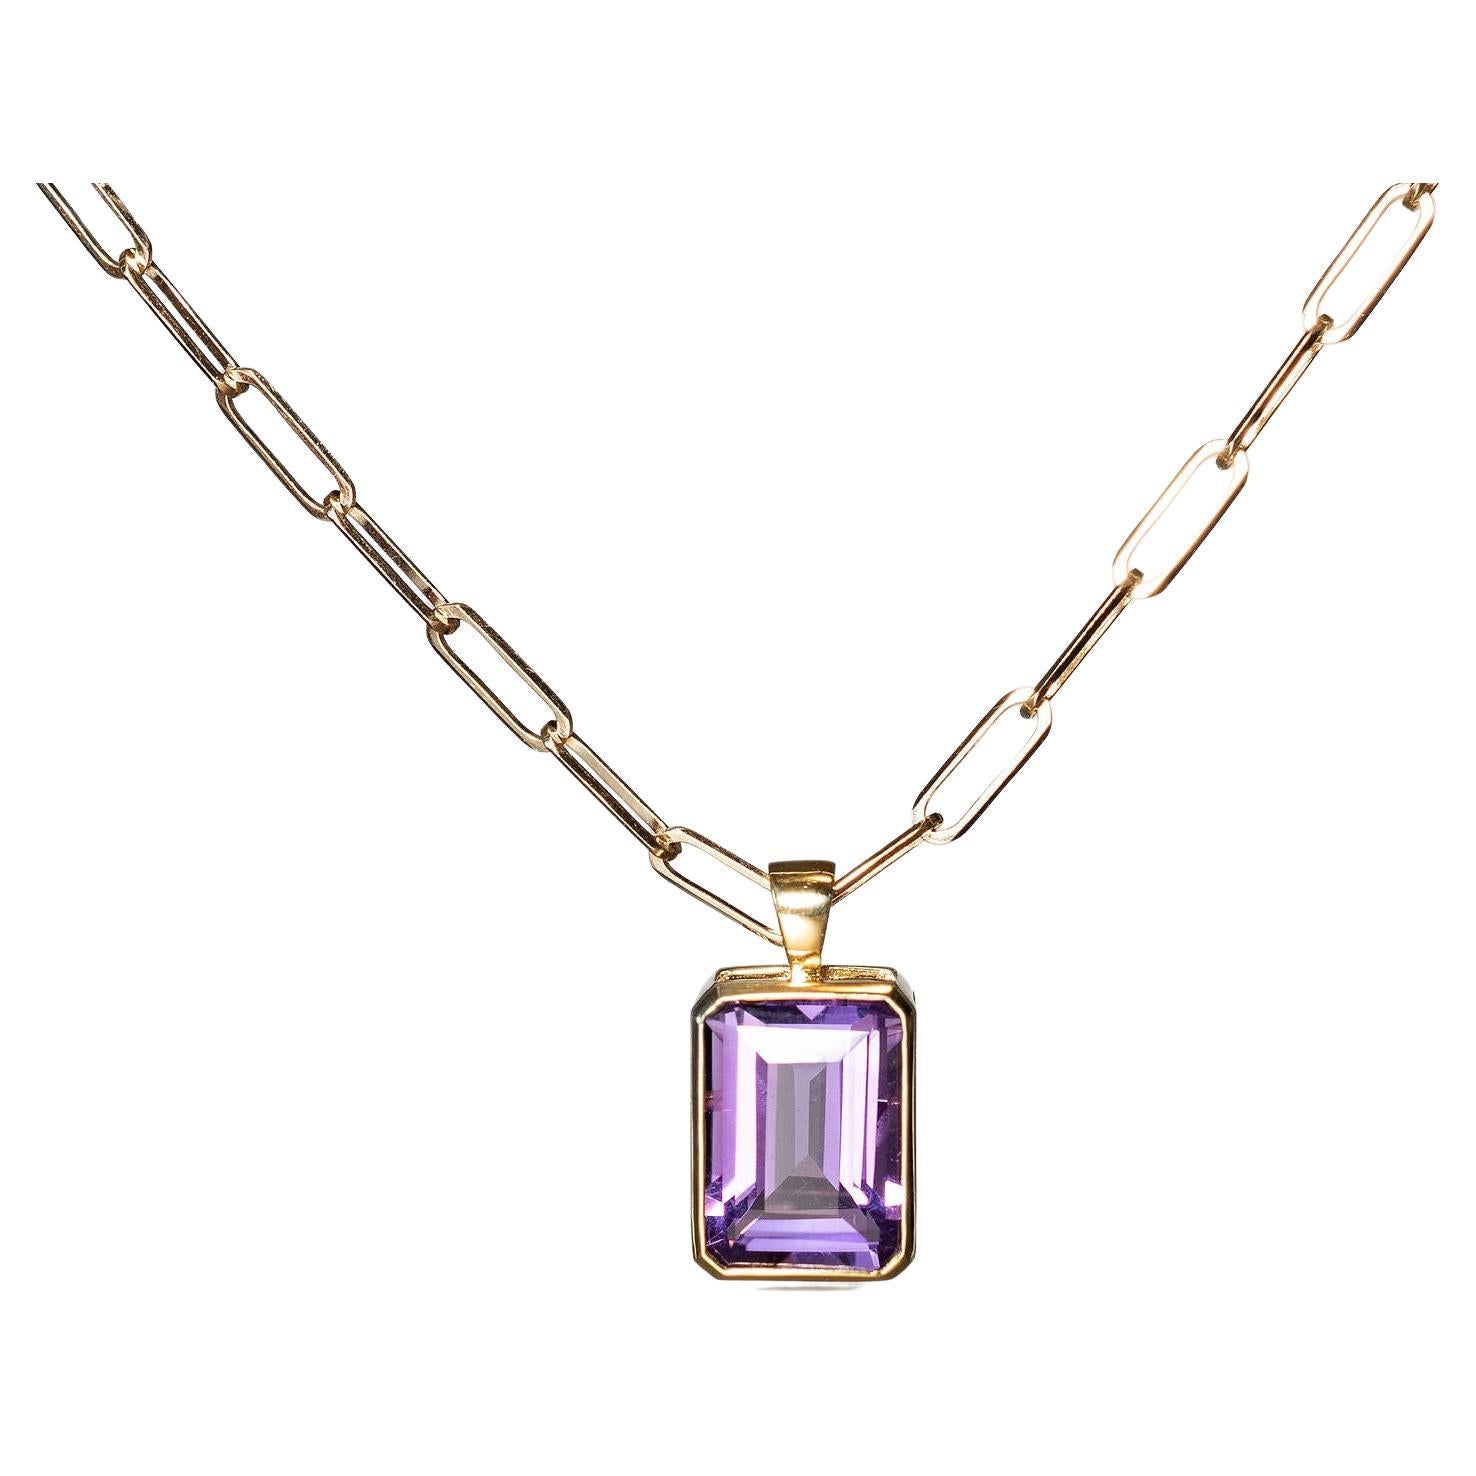 12ct Amethyst Pendant on a 14k yellow gold paperclip necklace - New Handmade